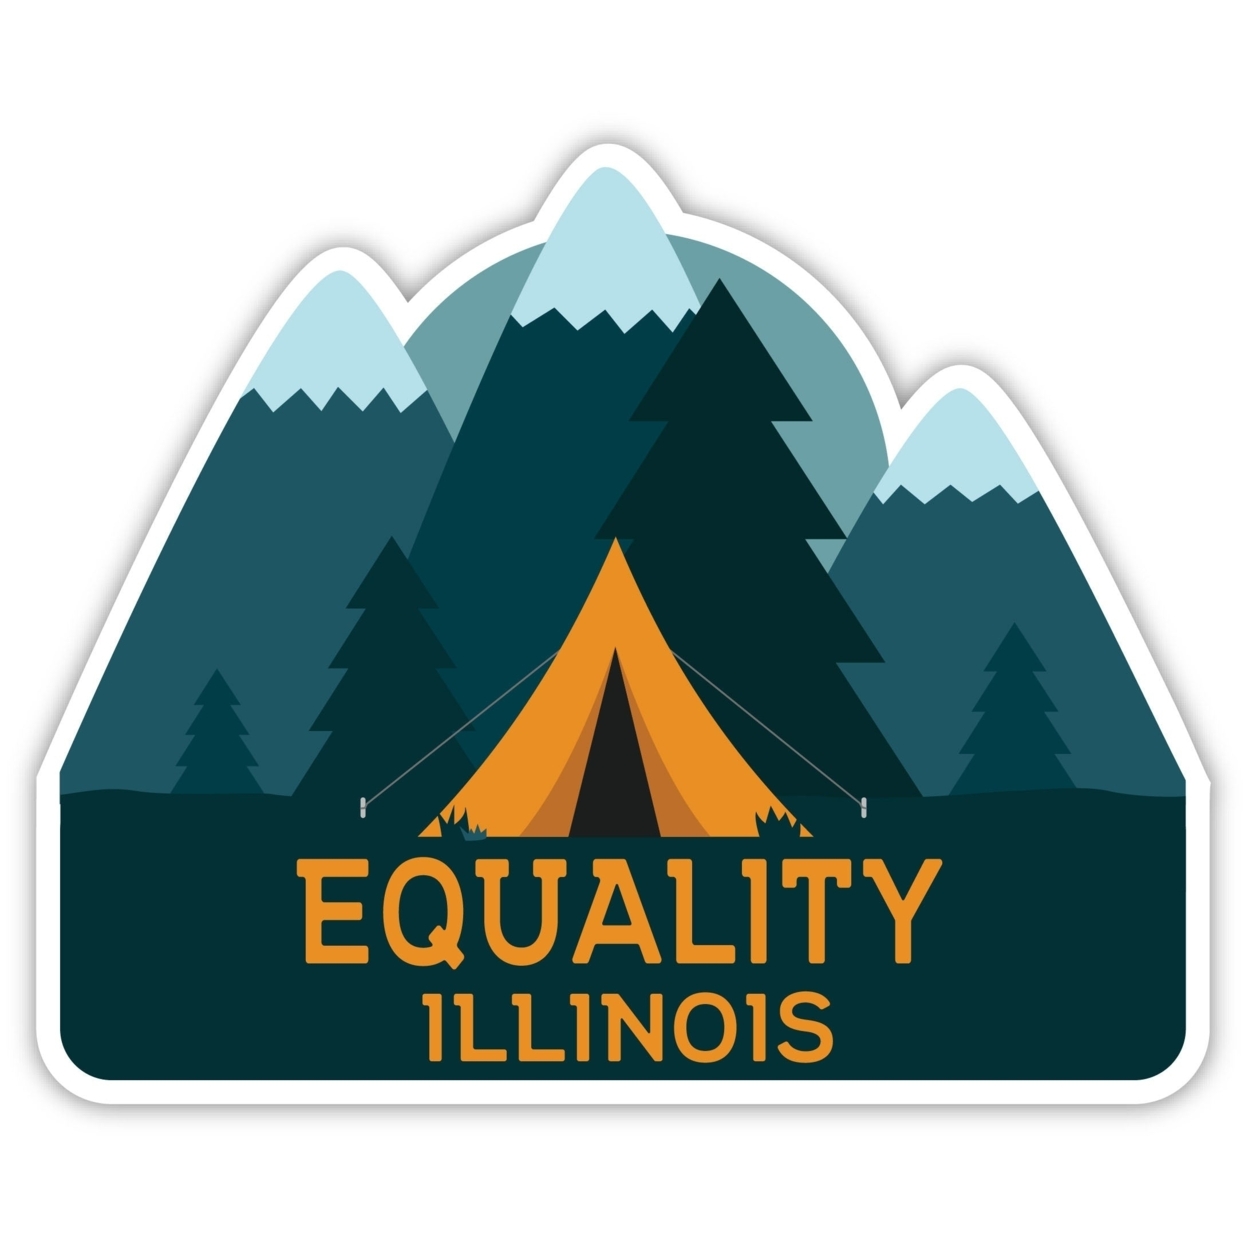 Equality Illinois Souvenir Decorative Stickers (Choose Theme And Size) - 4-Pack, 4-Inch, Tent